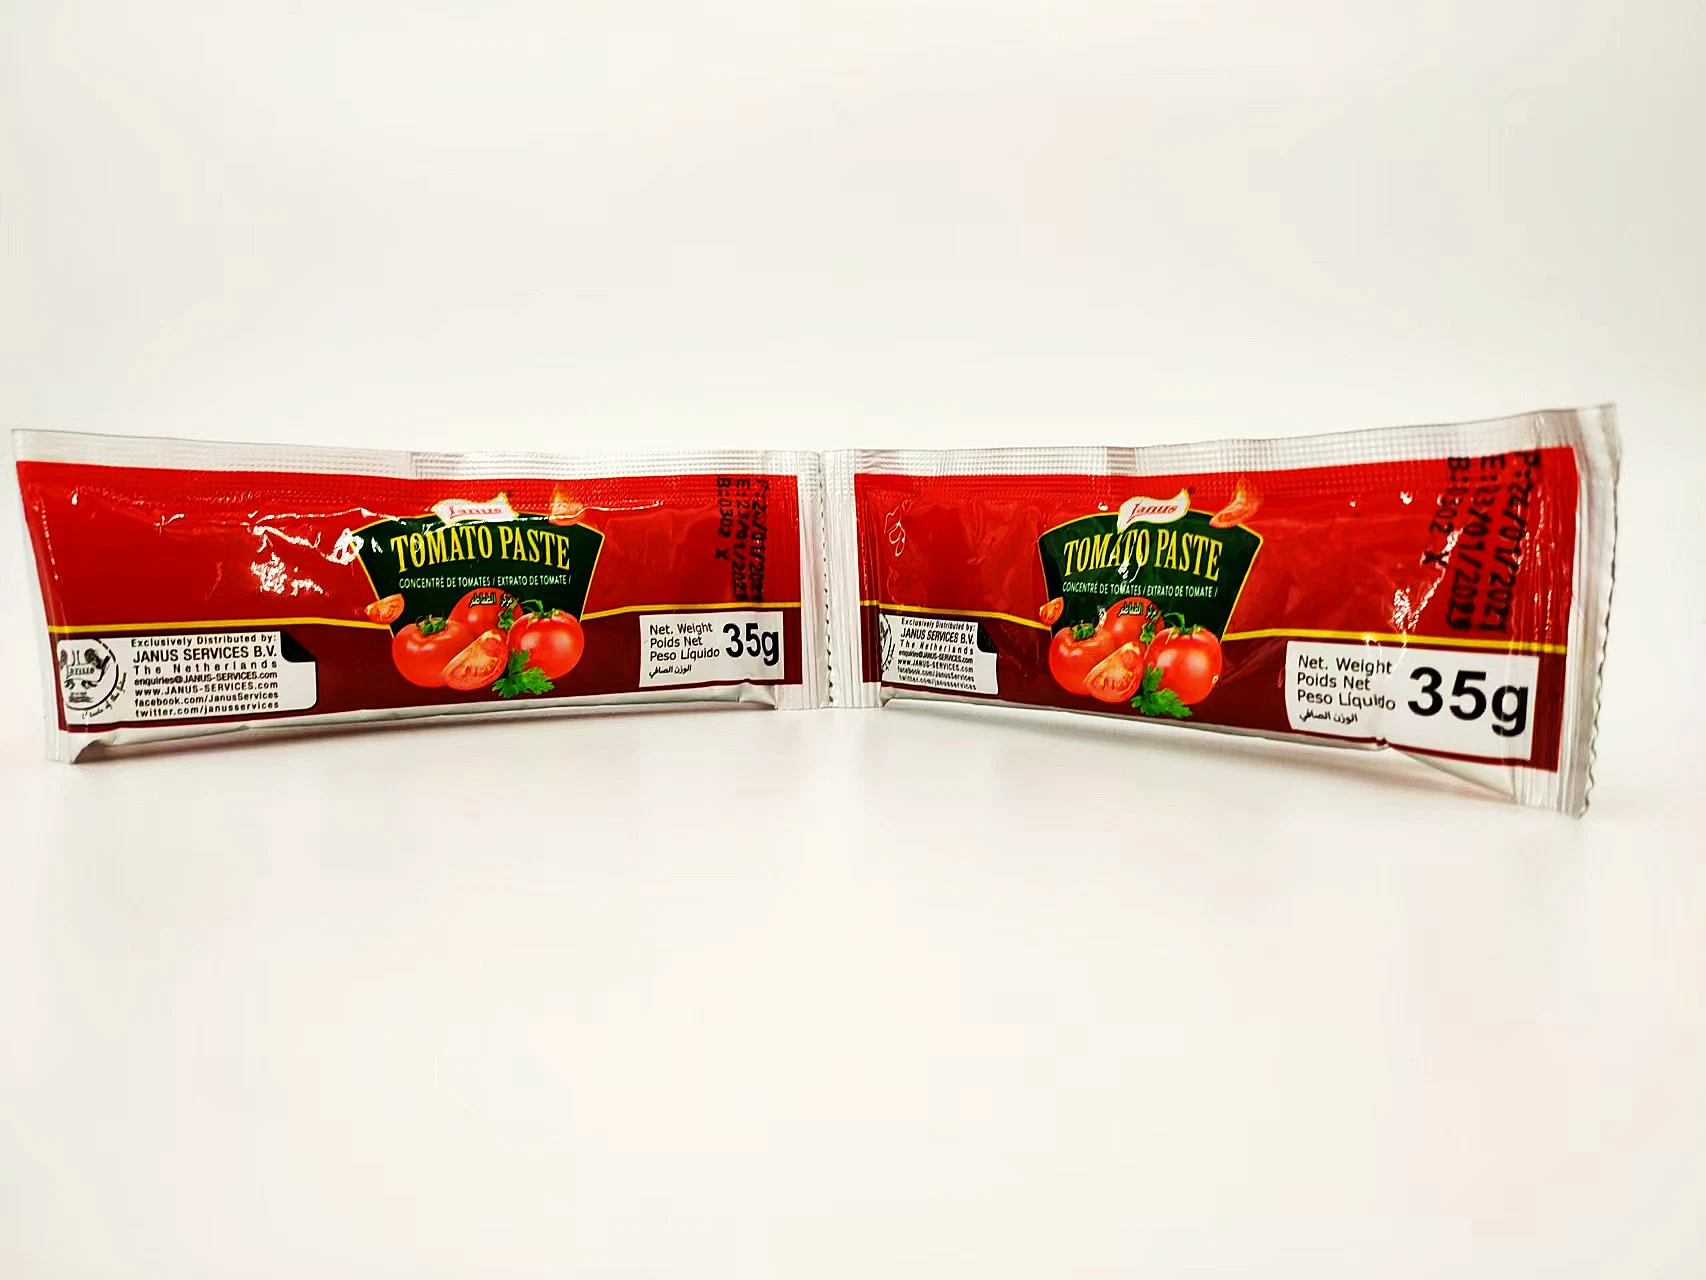 Competitive China Manufacturer of Canned Tomato Patste